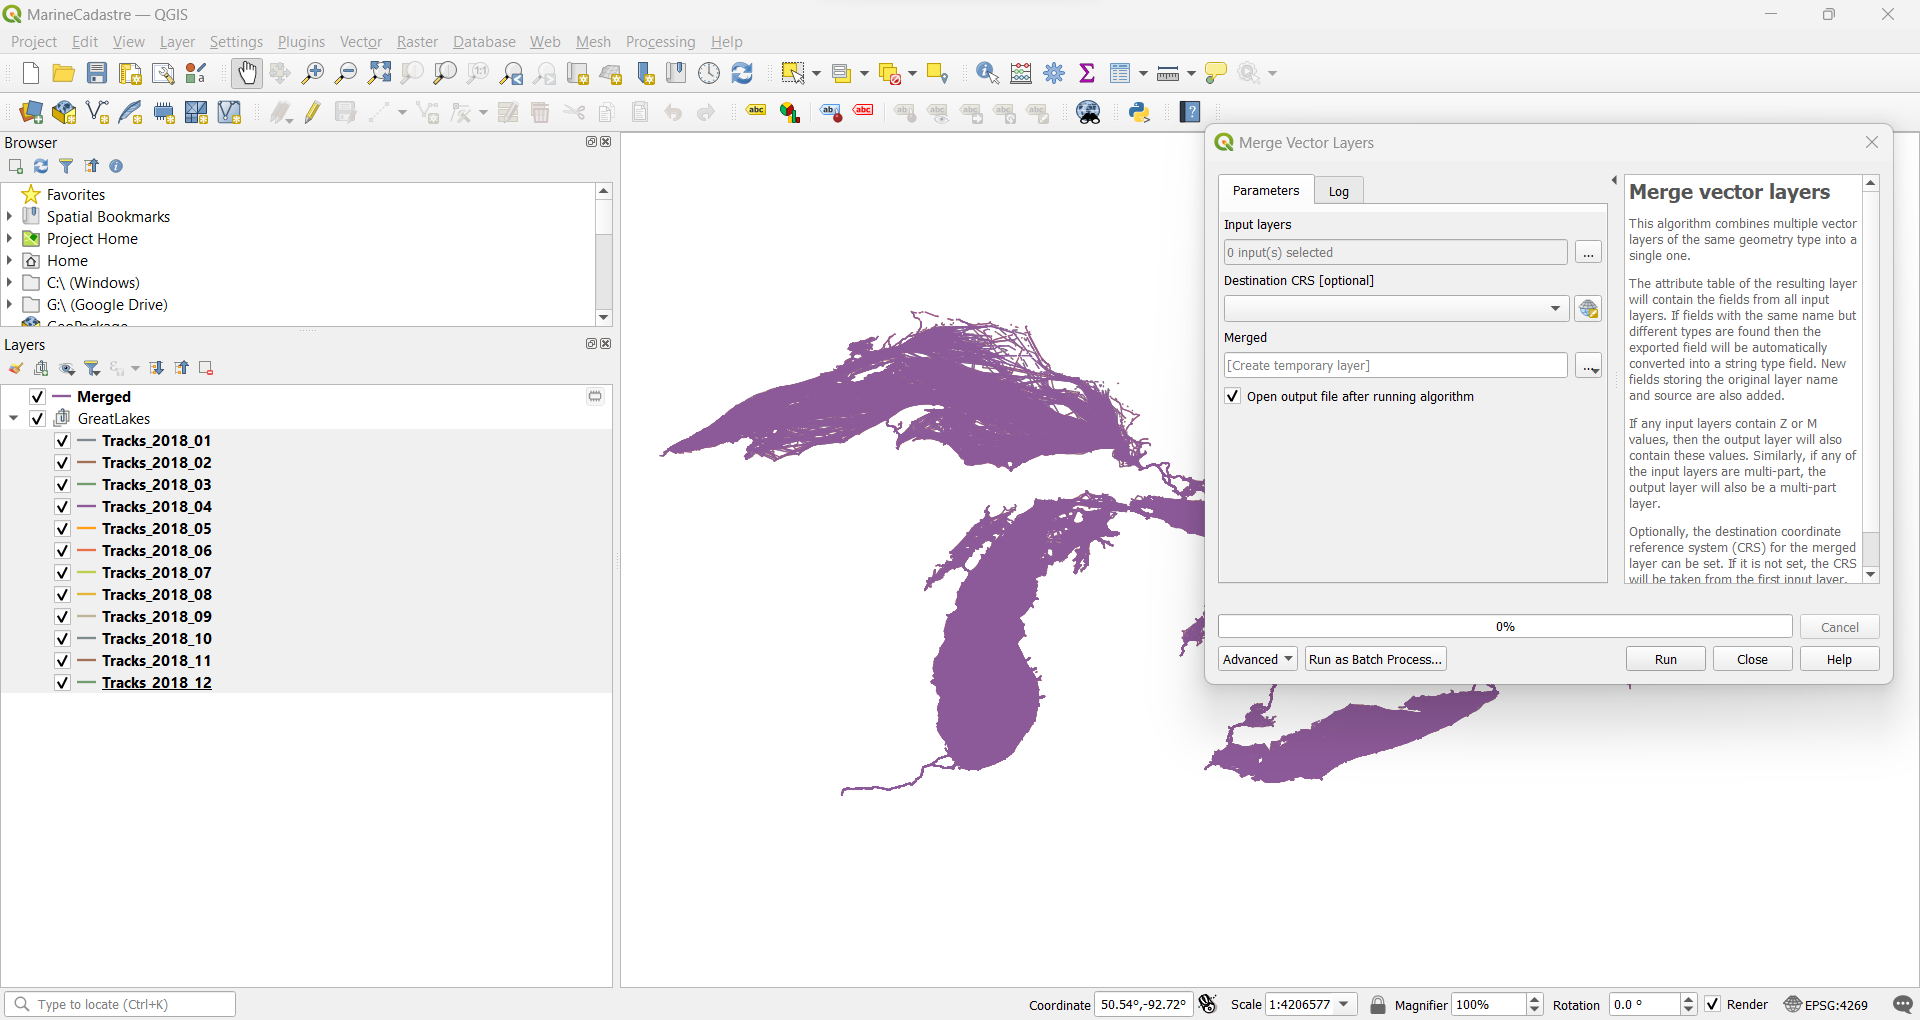 Merged with QGIS